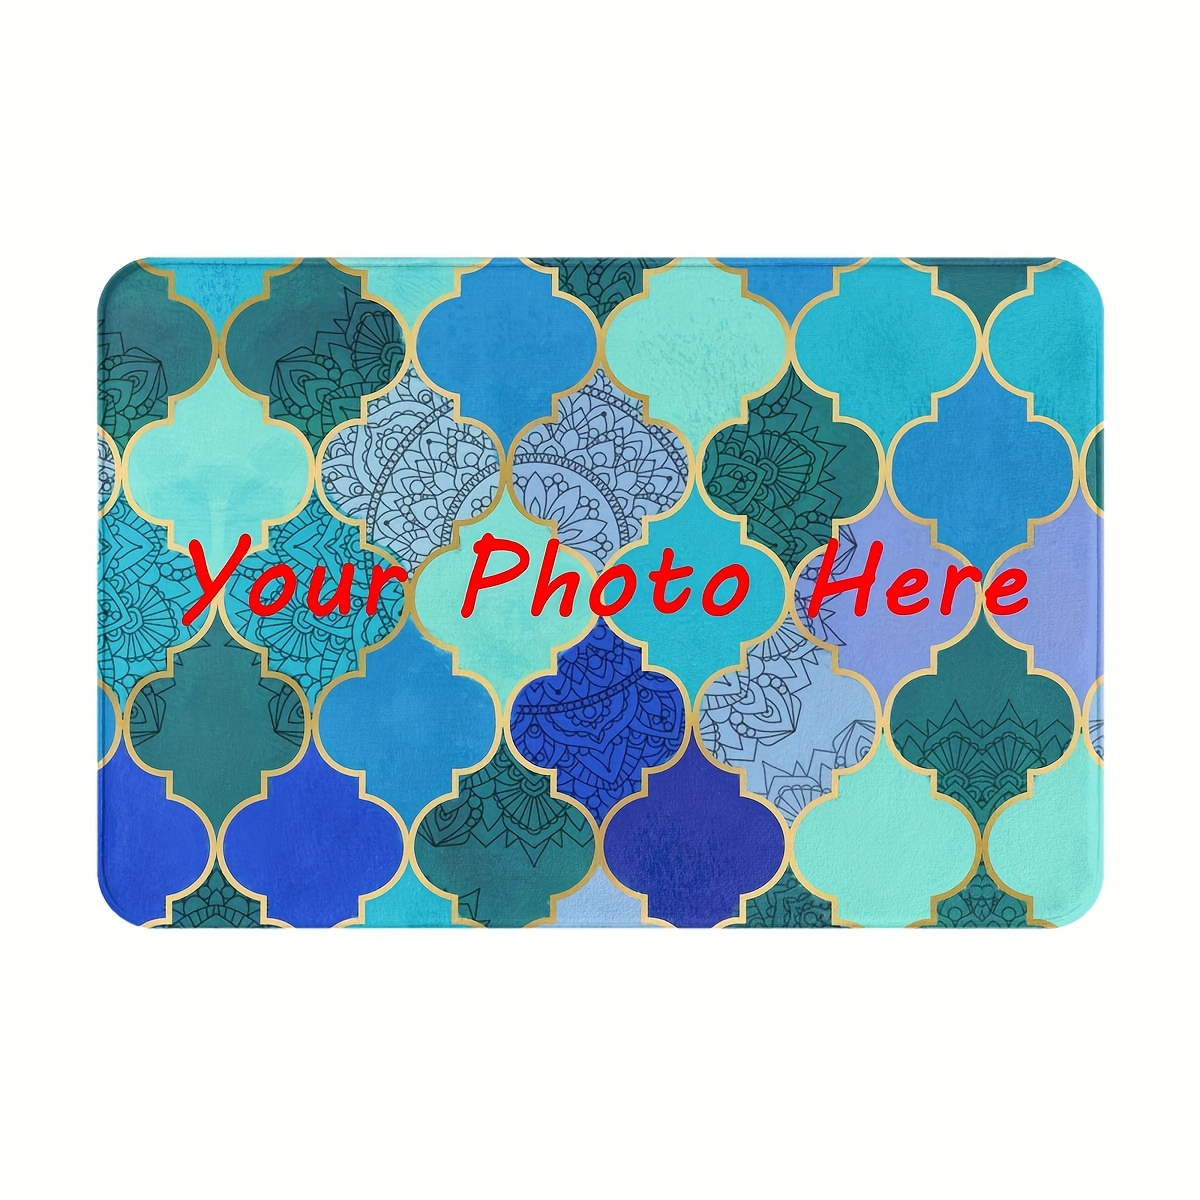 

Custom Photo Logo Door Mat - Personalized Non-slip Area Rug For Home & Office Decor, Perfect For Bedroom, Bathroom, Living Room, Entryway, Patio - Machine Washable, Ultra-fine Fiber, 16x24 Inches